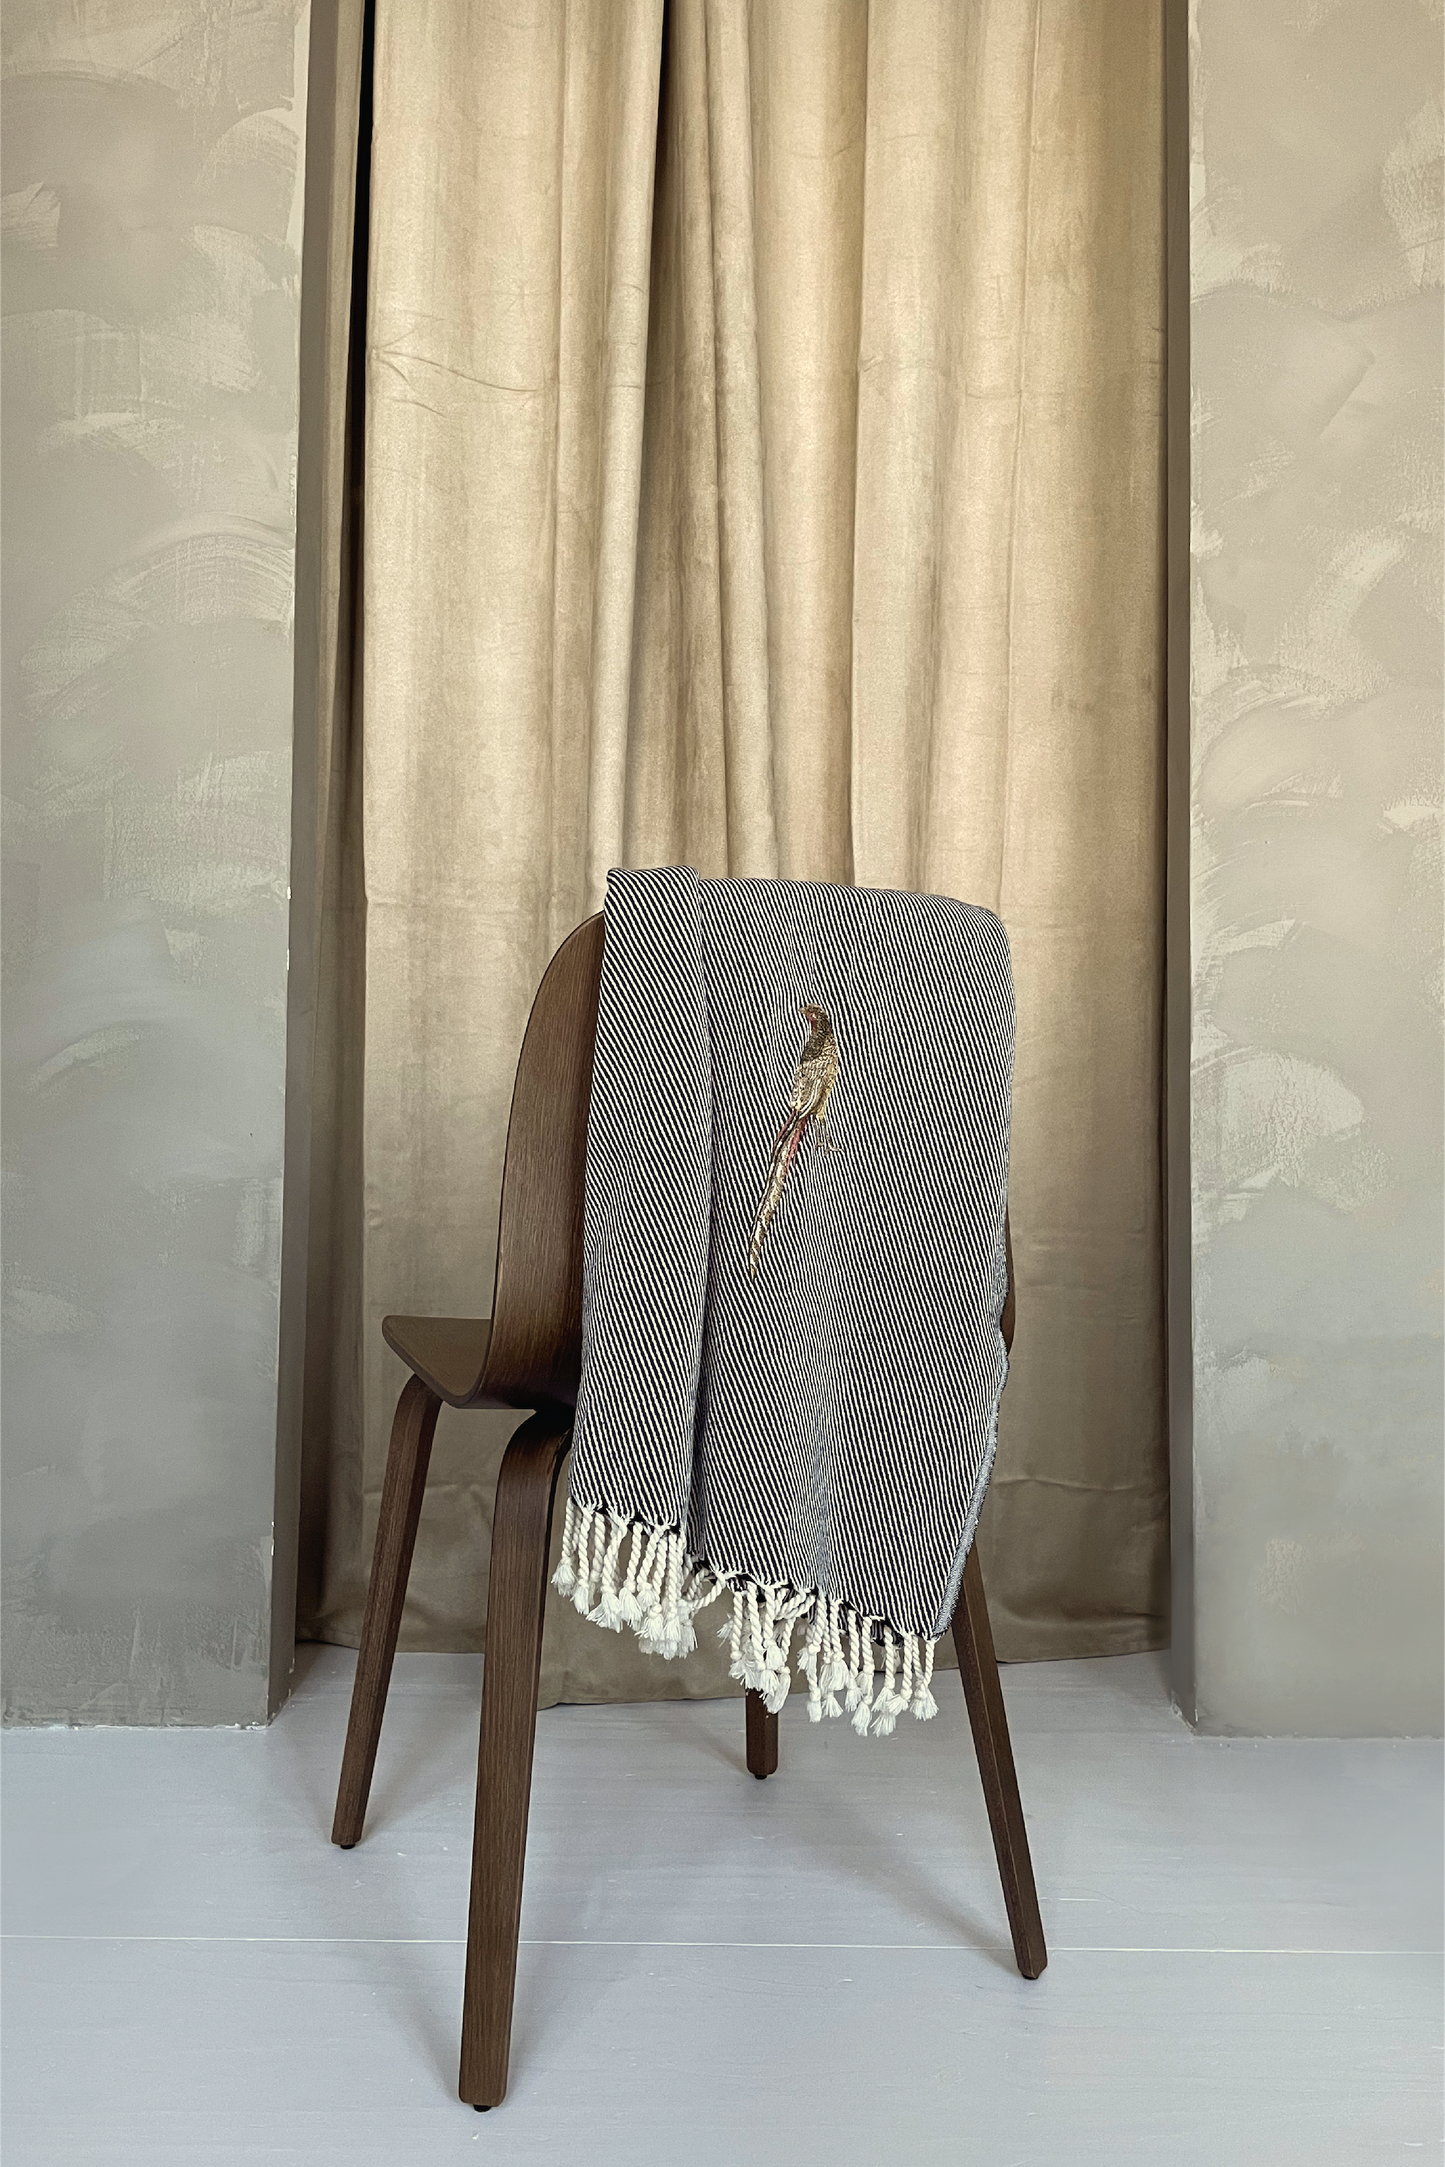 EMBROIDERED HAMMAM TOWEL |  THE PHEASANT IN BLACK